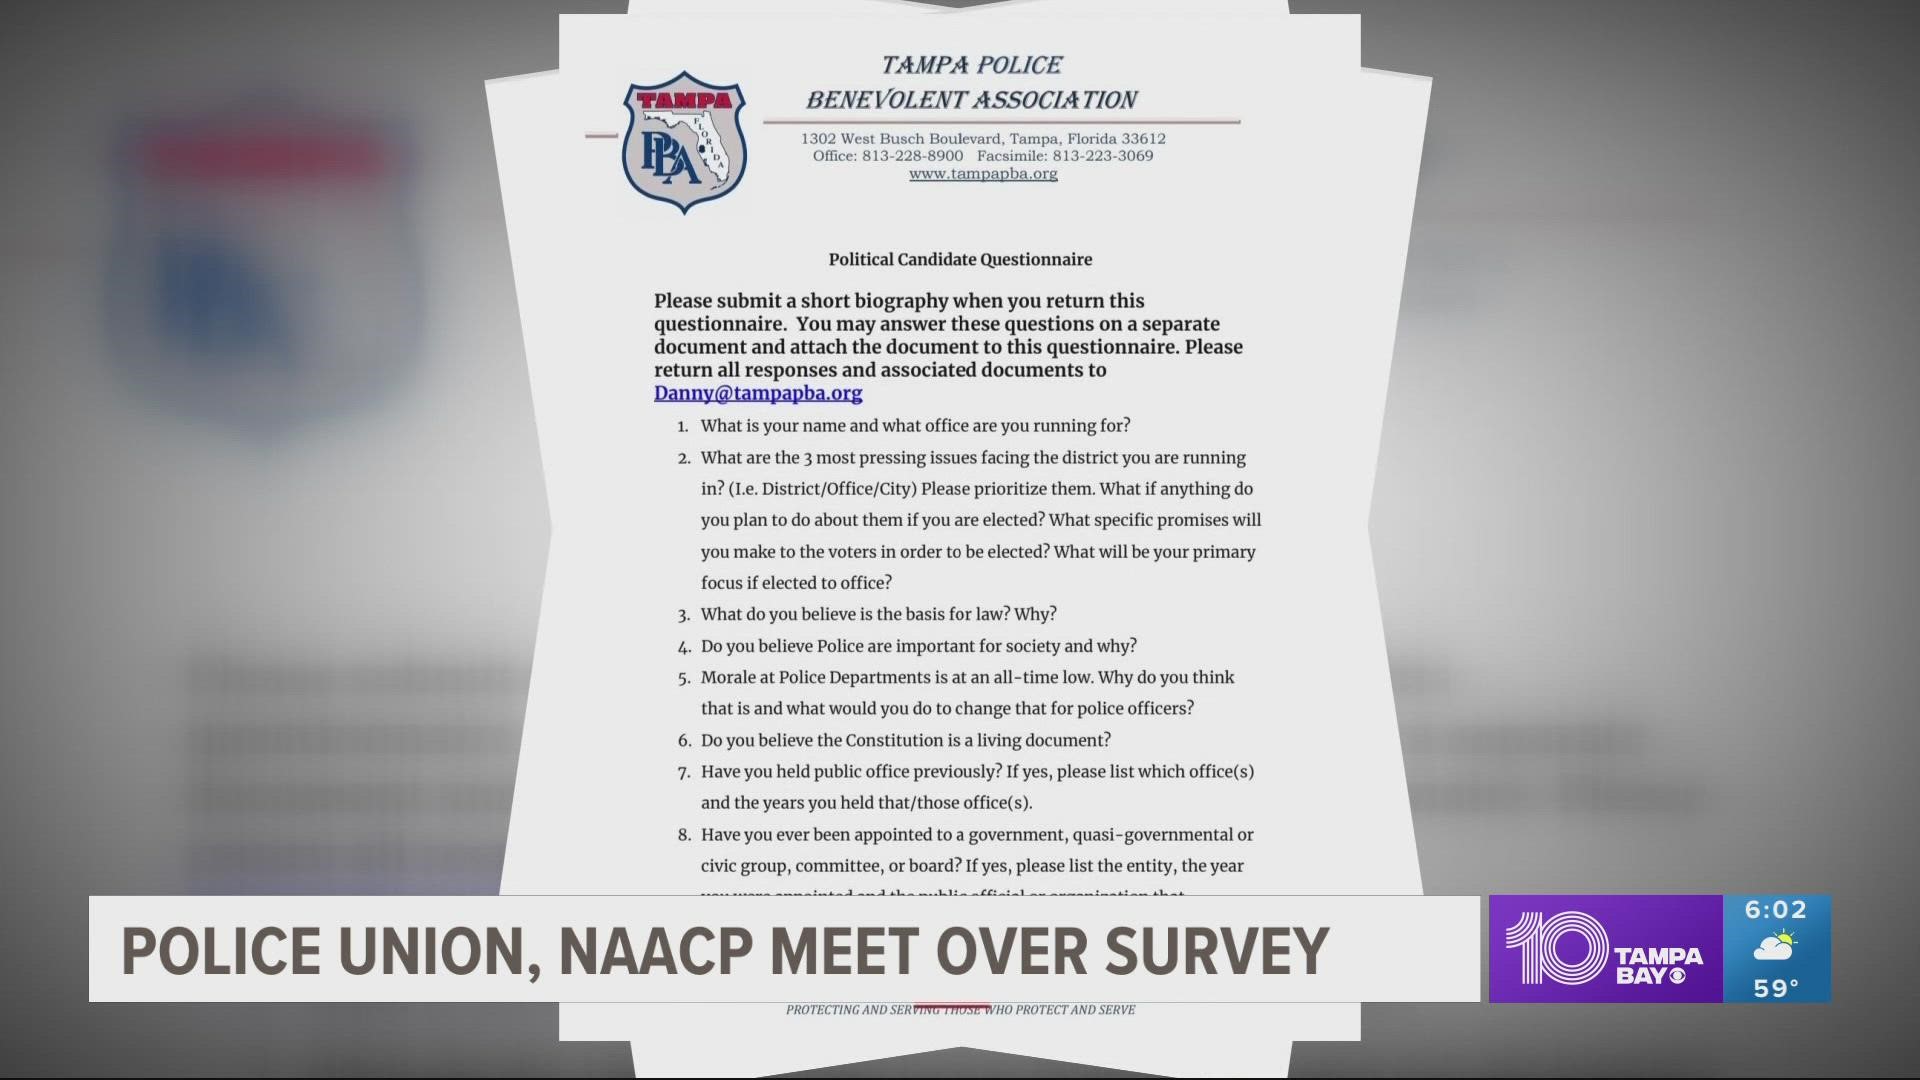 The NAACP says it was a tough but necessary conversation.